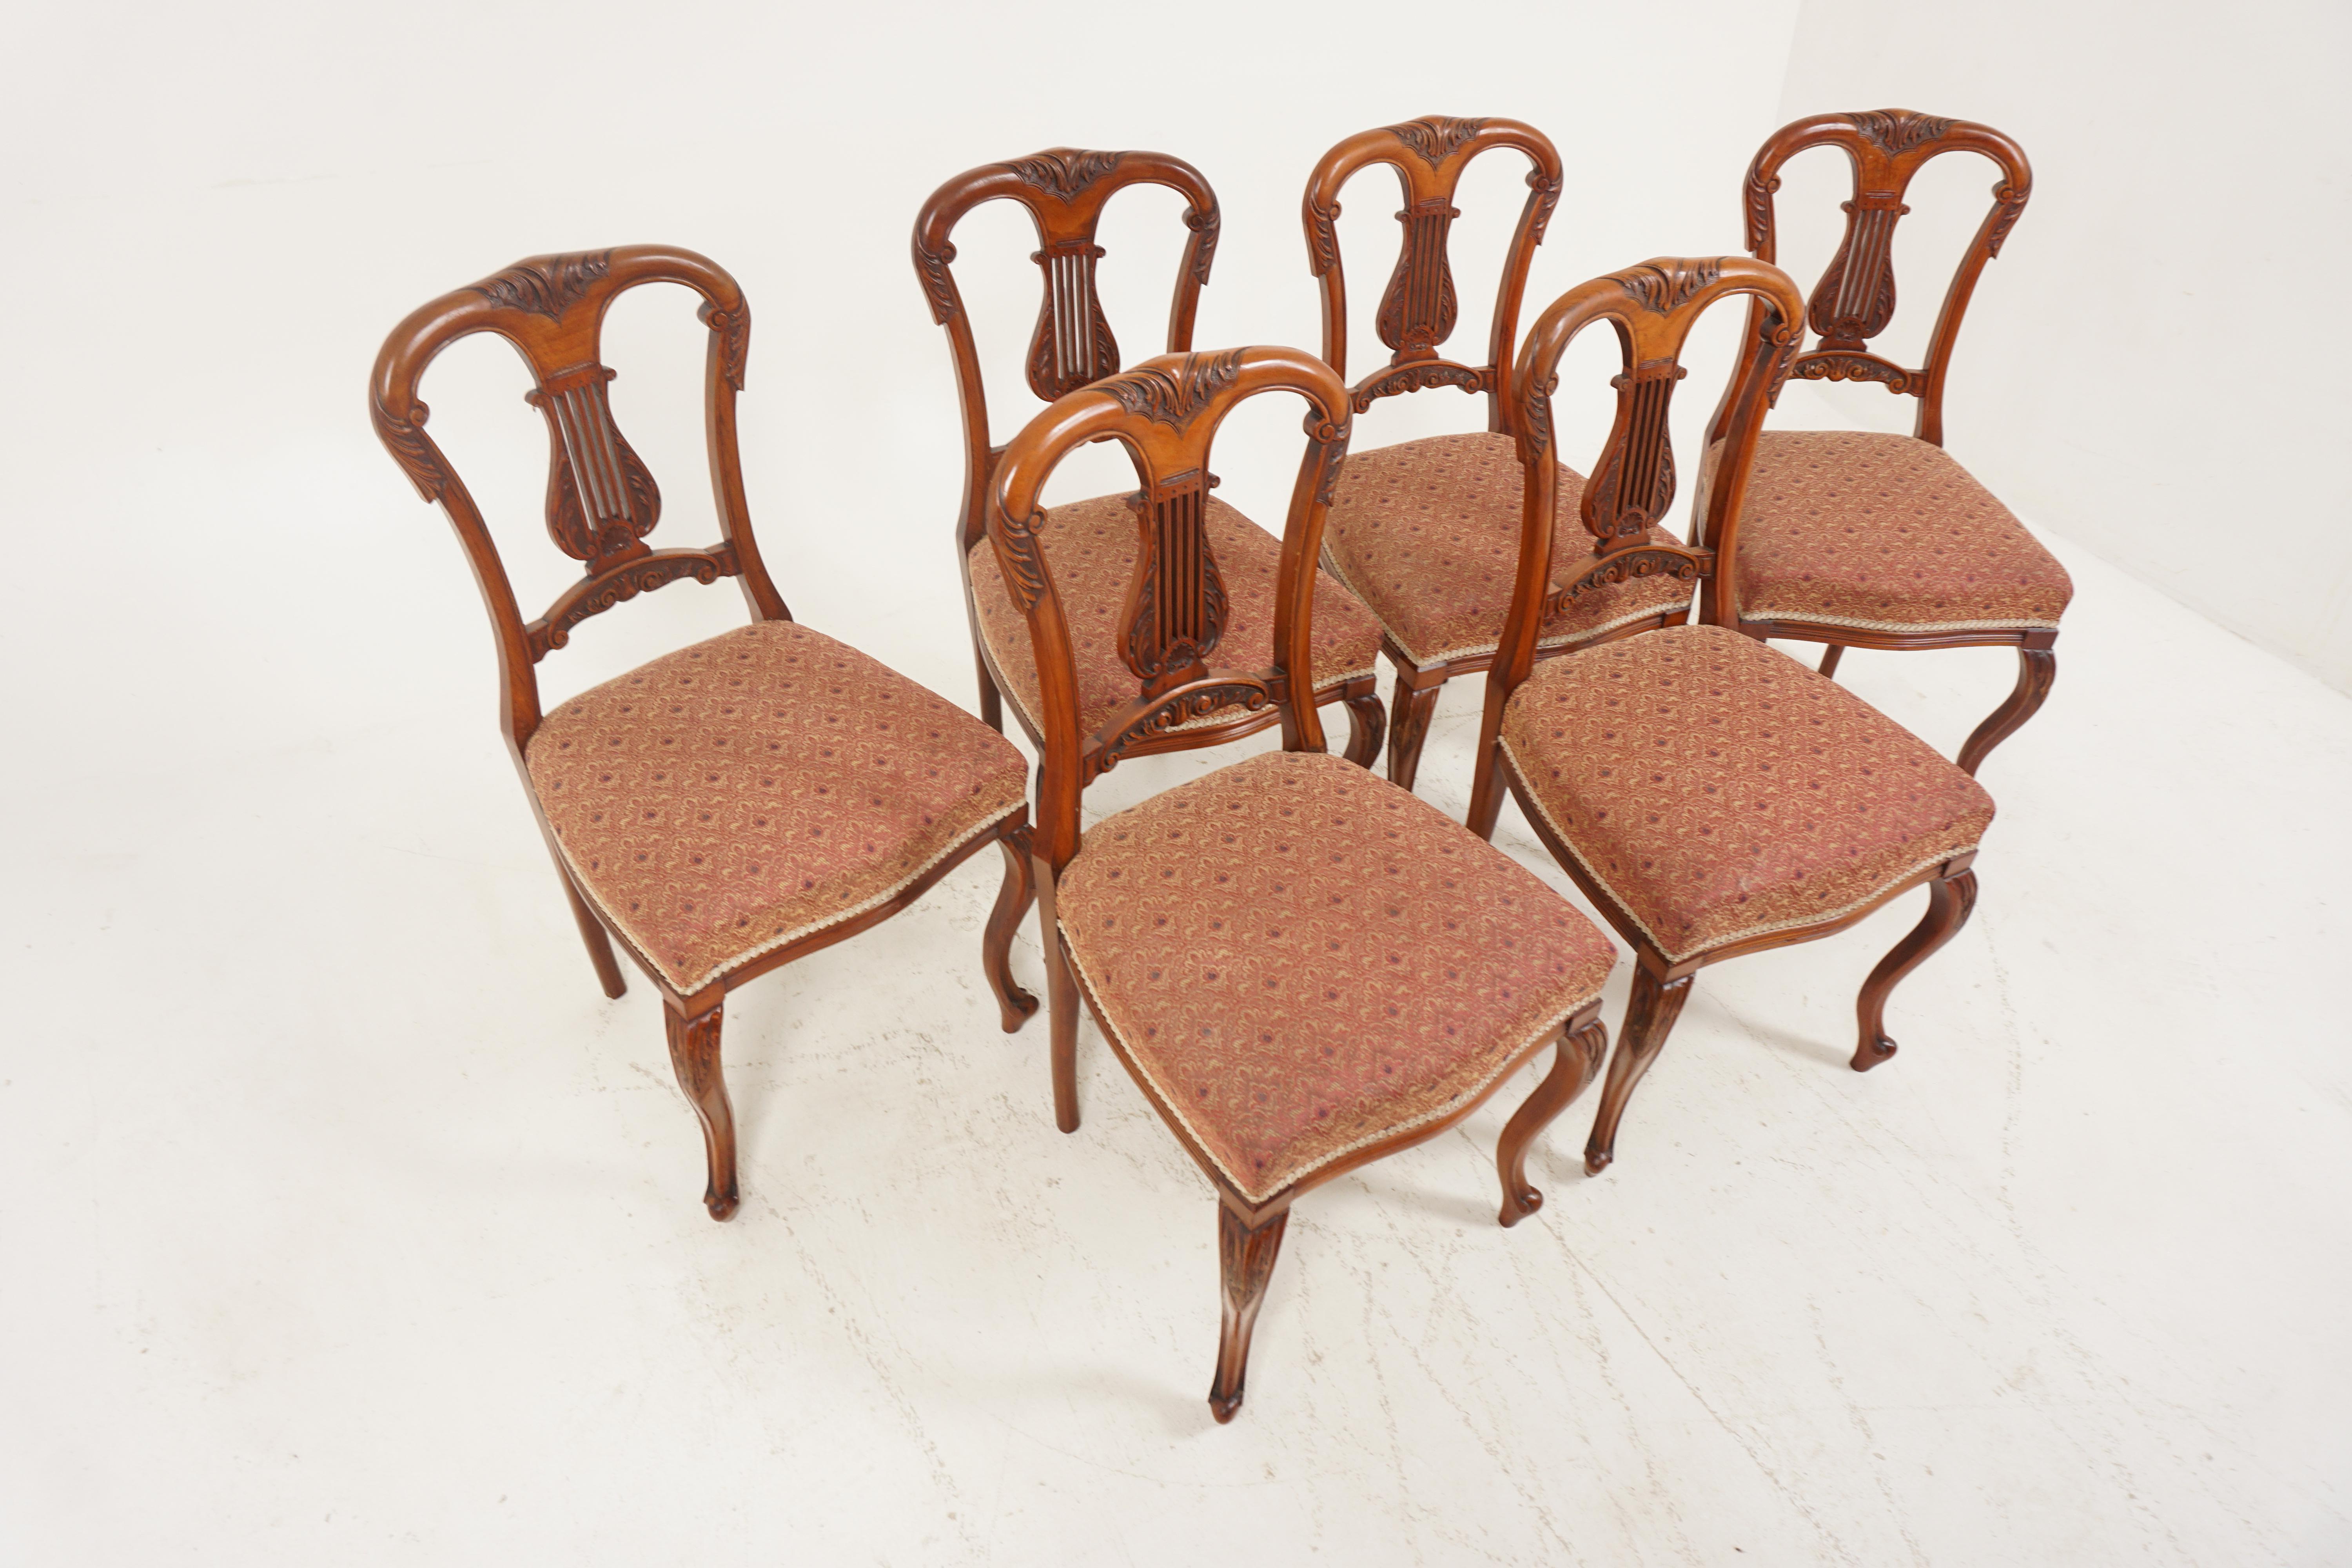 Hand-Crafted Set of 6 Antique Victorian Carved Walnut Dining Chairs, Scotland 1890, H223